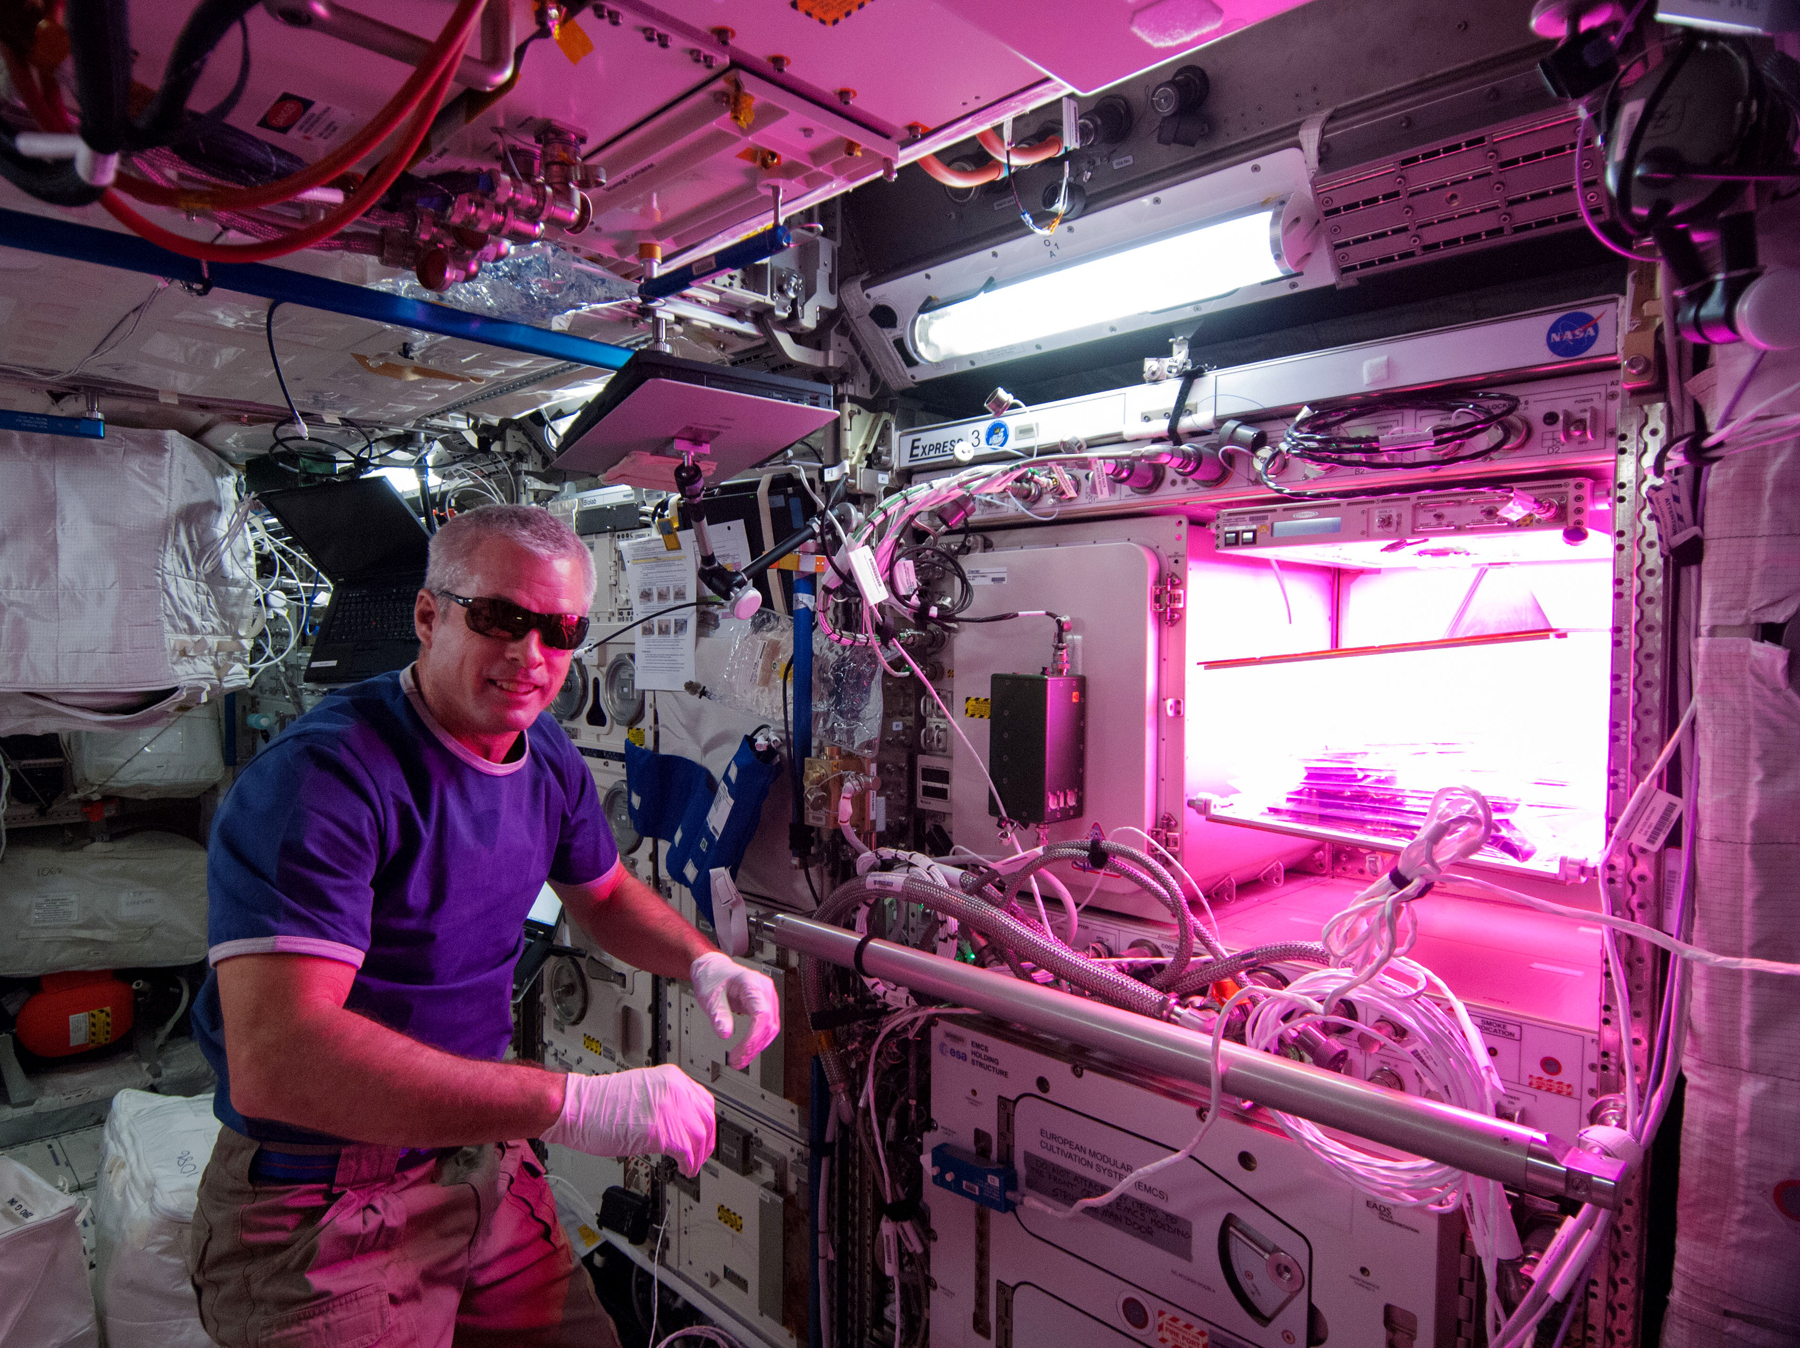 Astronaut Steve "Swanny" Swanson tends to lettuce plants growing at the International Space Station that may one day make it into his salad. Photo: Courtesy of NASA